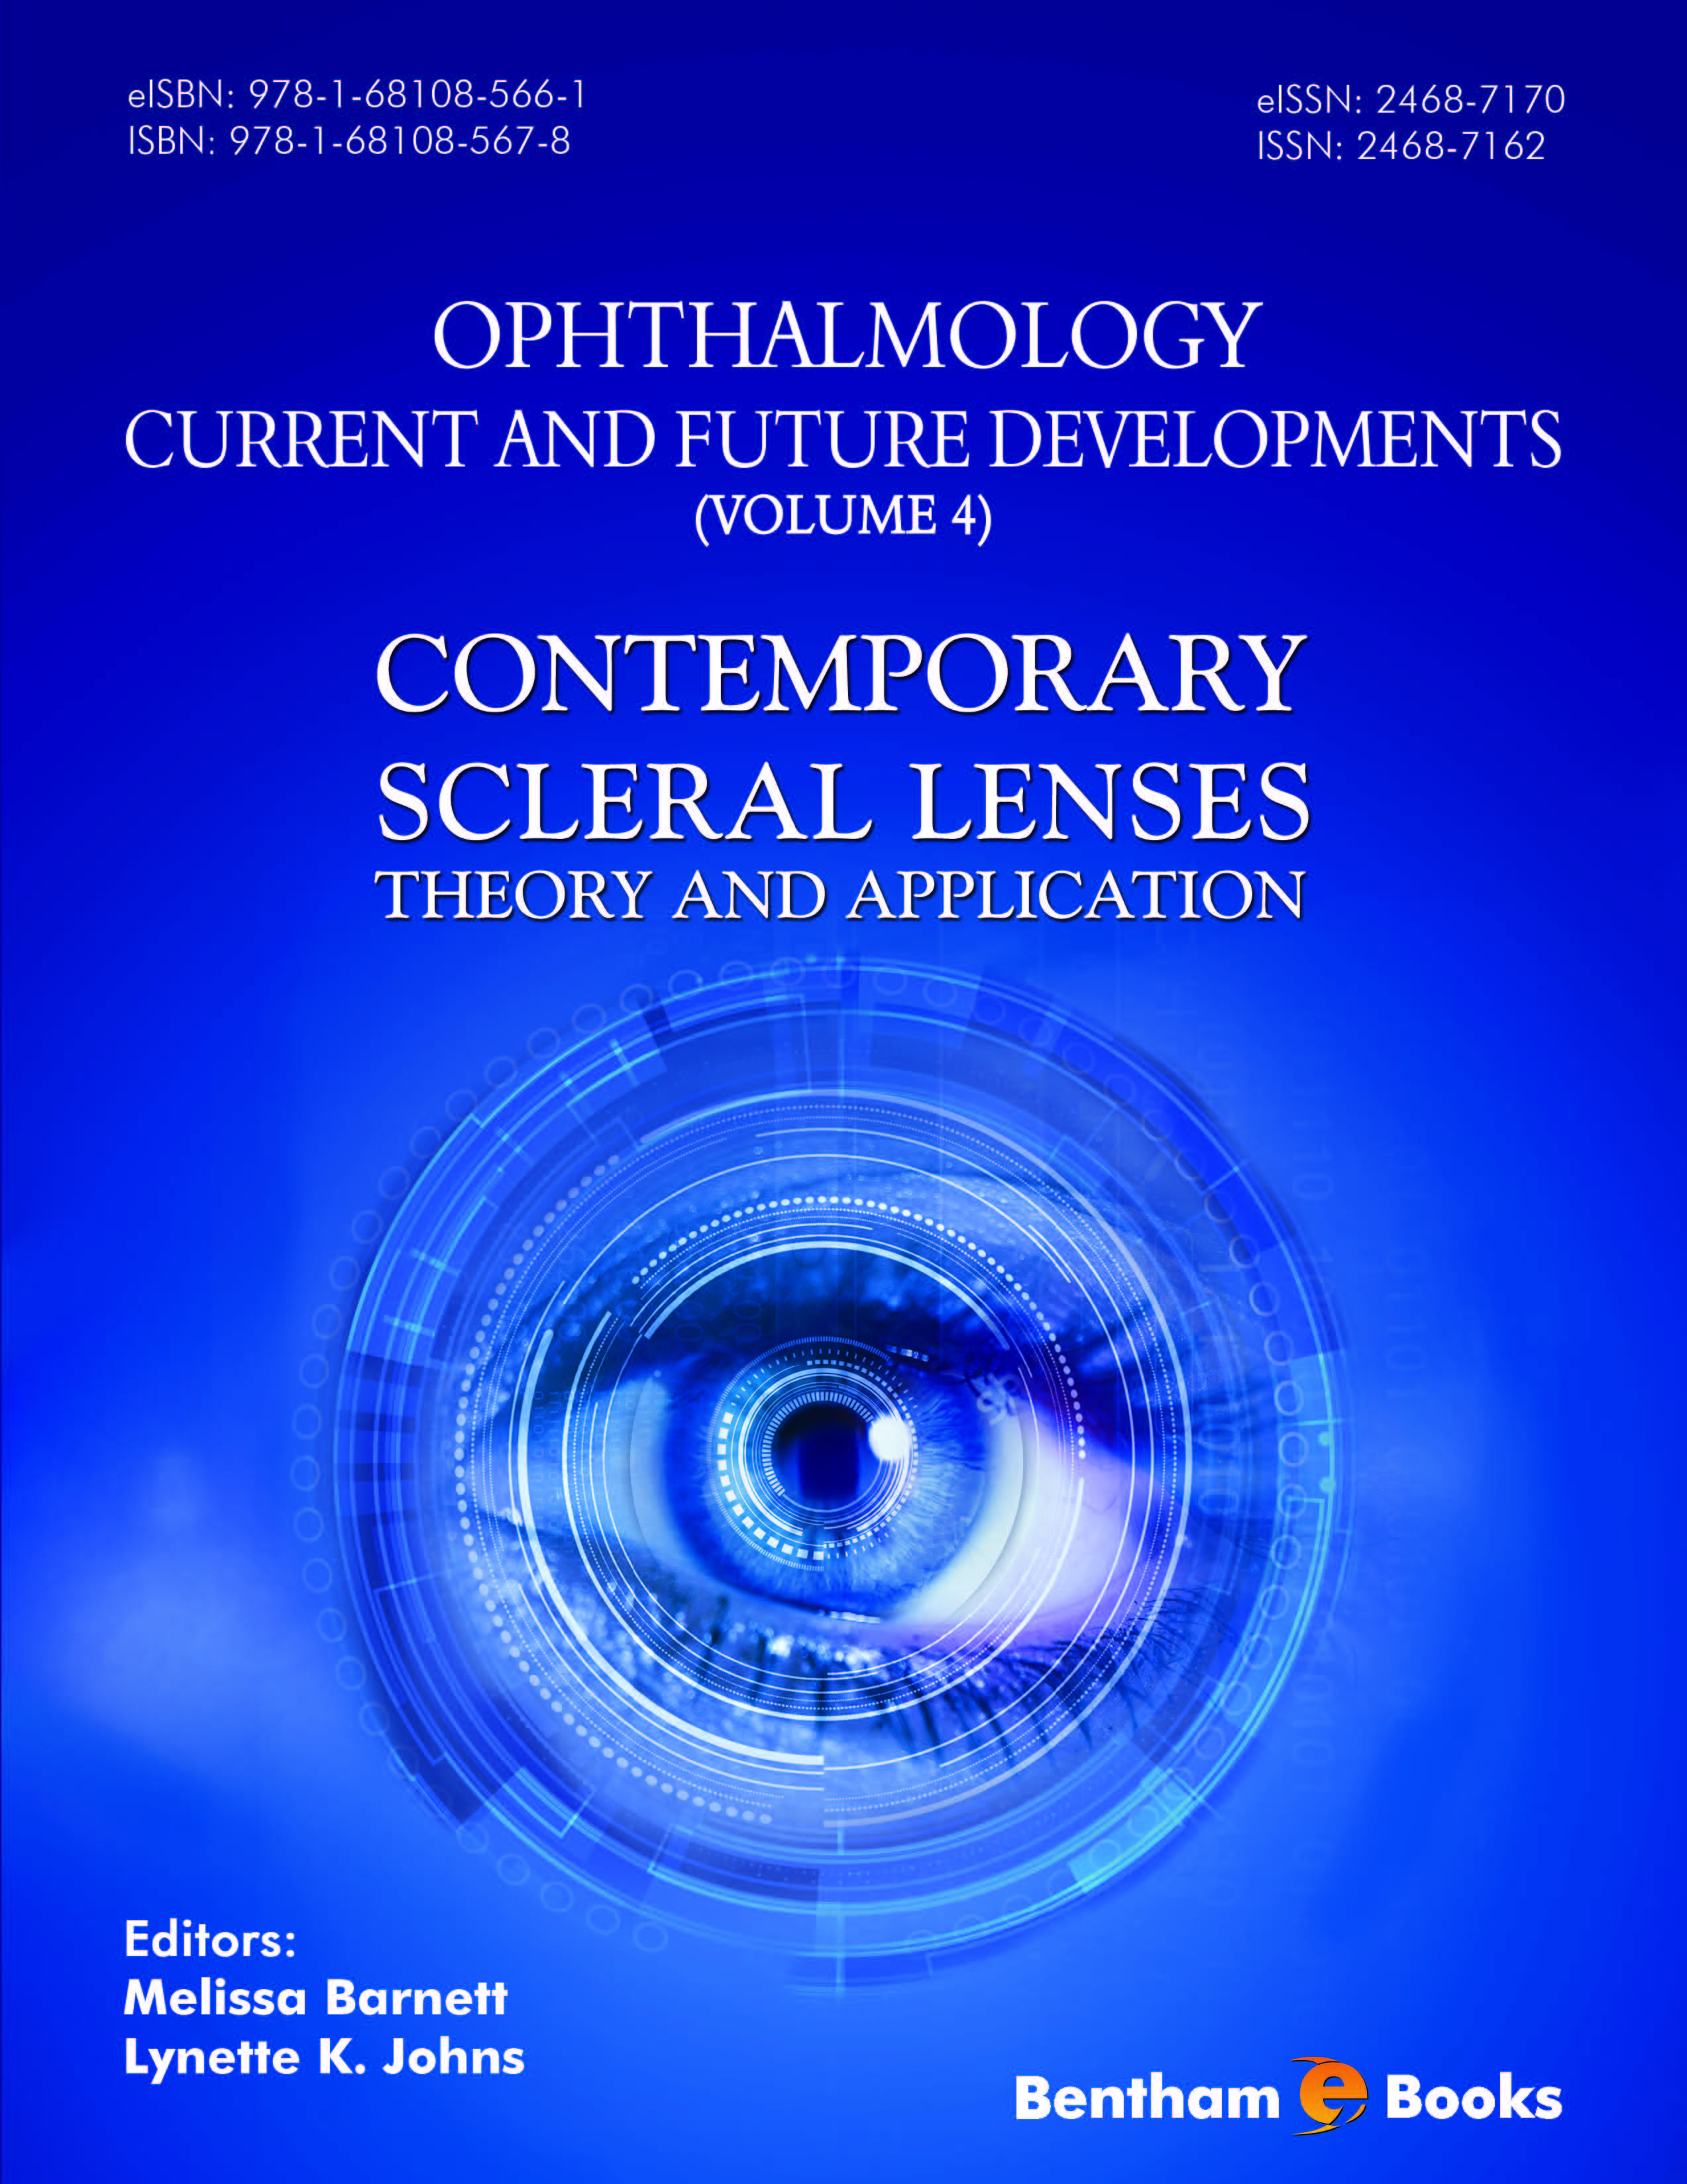 Contemporary Scleral Lenses: Theory and Application